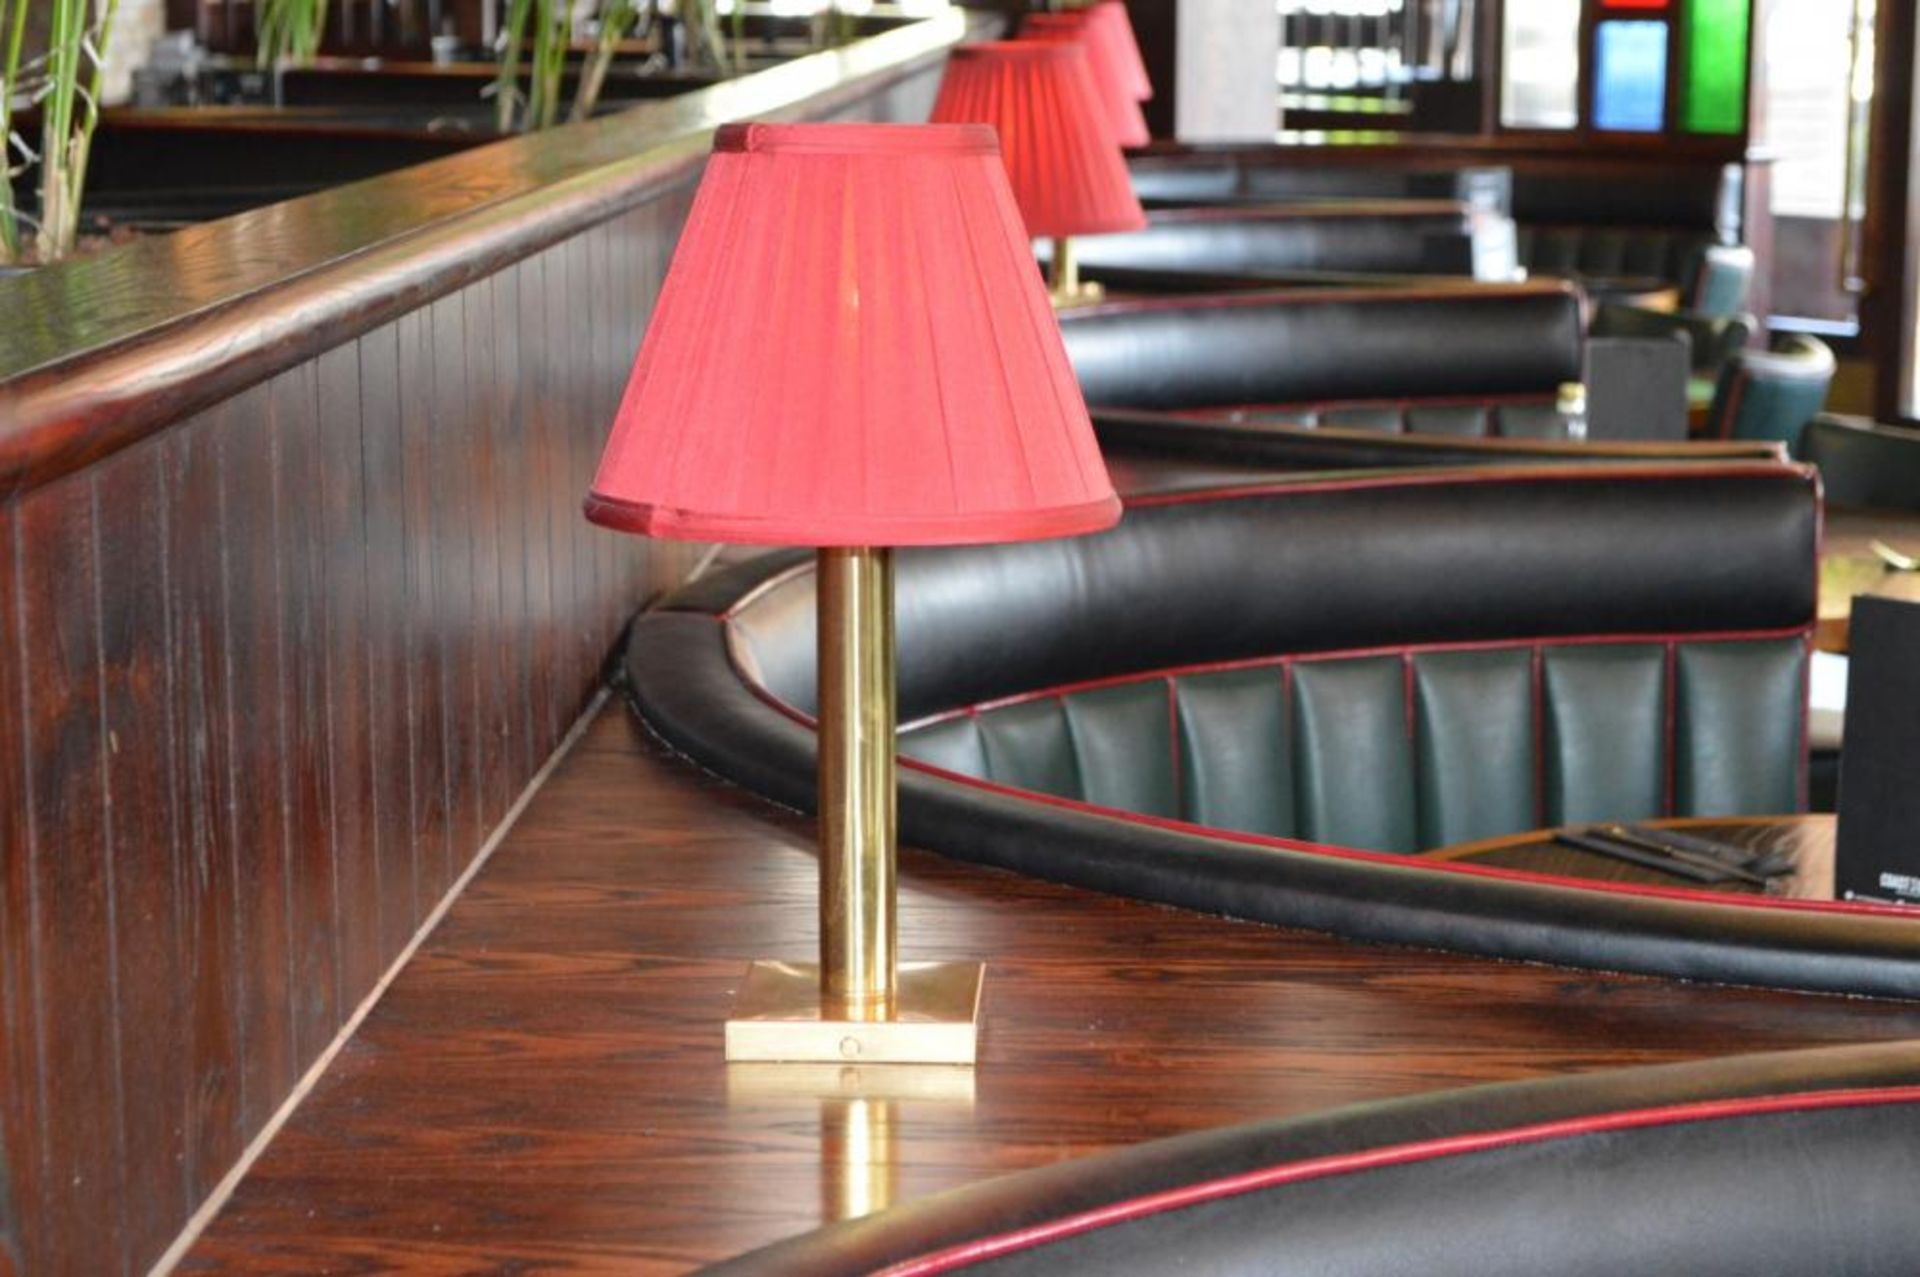 10 x Fixed Table Lamps With a Brass Finish and Red Shades -Total Height 46cms - Image 2 of 2